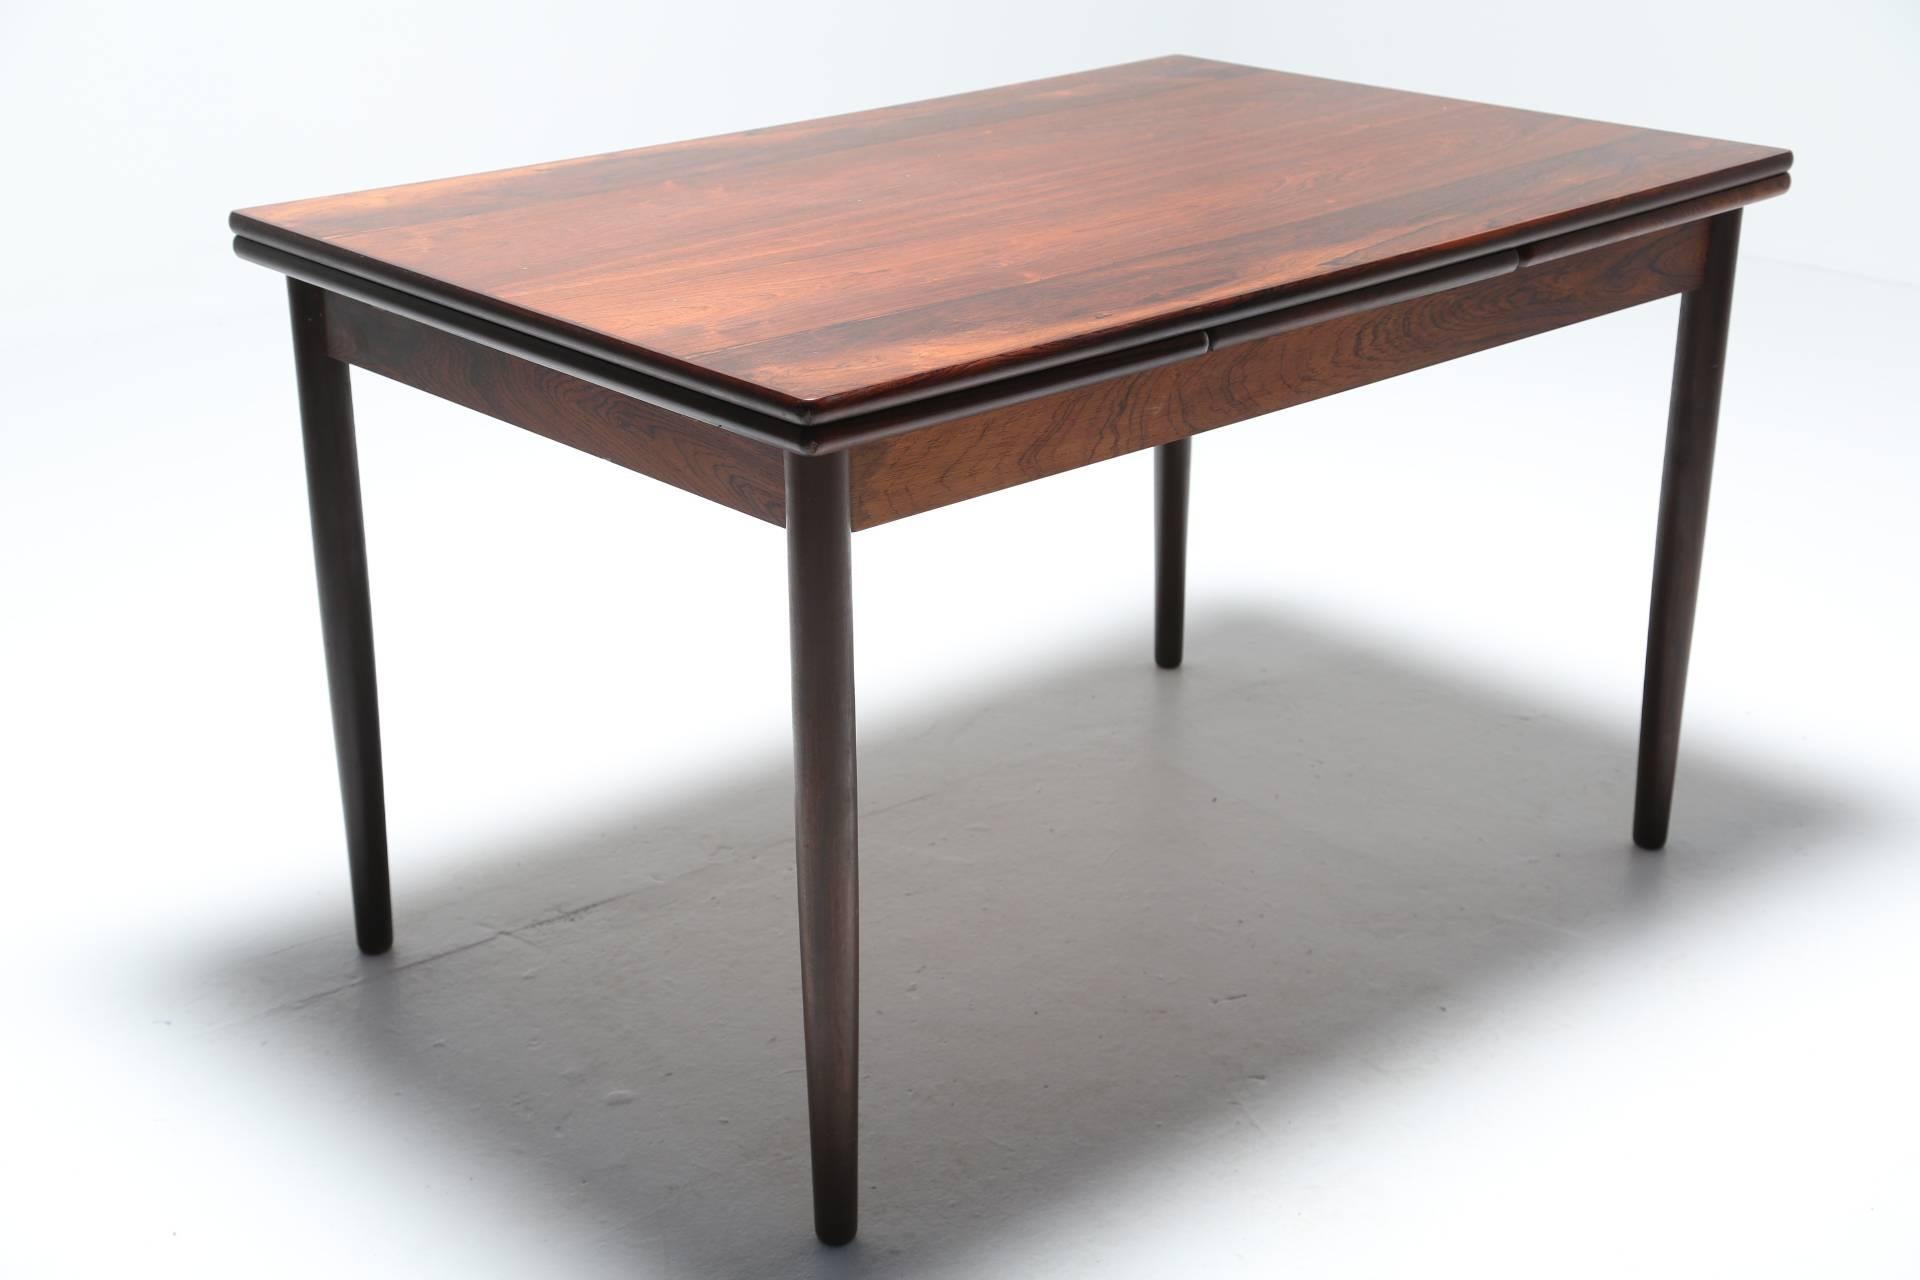 A beautiful Mid-Century Danish rosewood extendable table was that is very much in the style of Niels O. Moller. The wood is absolutely stunning and has a continuous grain and deep rich tones of fiery red and black. With two leaves for extending the